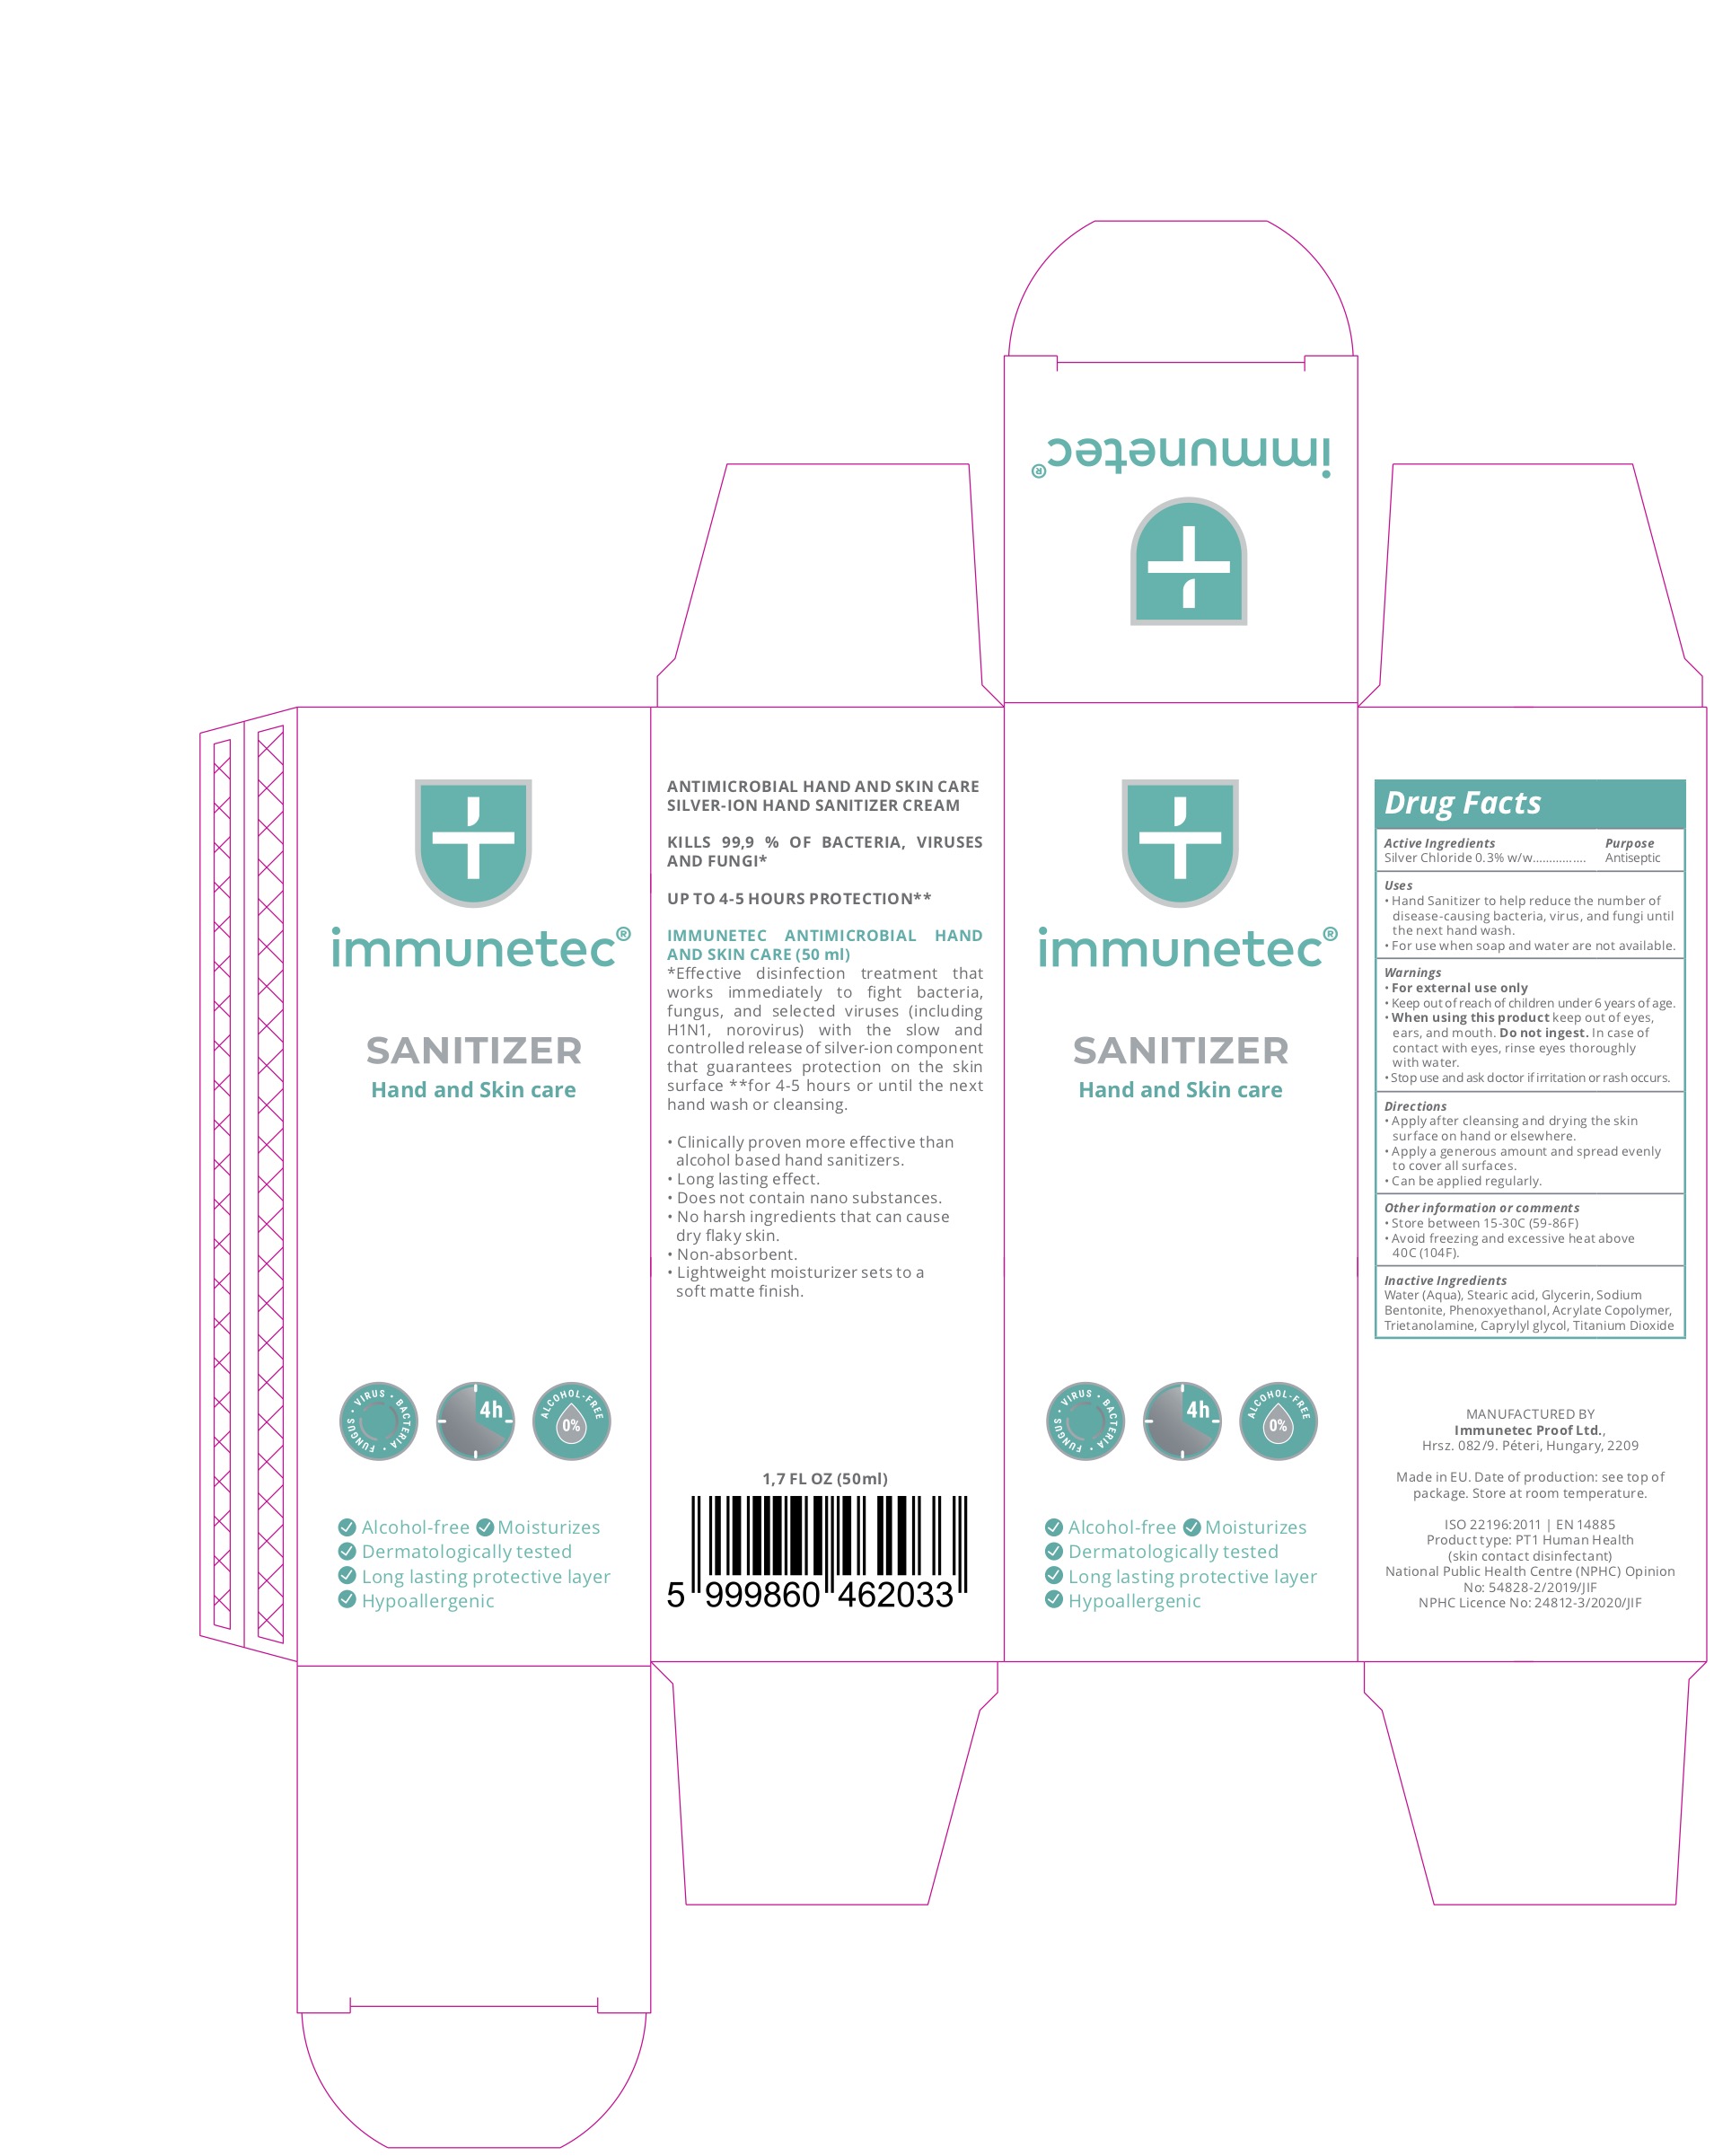 Sanitizer Hand and Skin Care